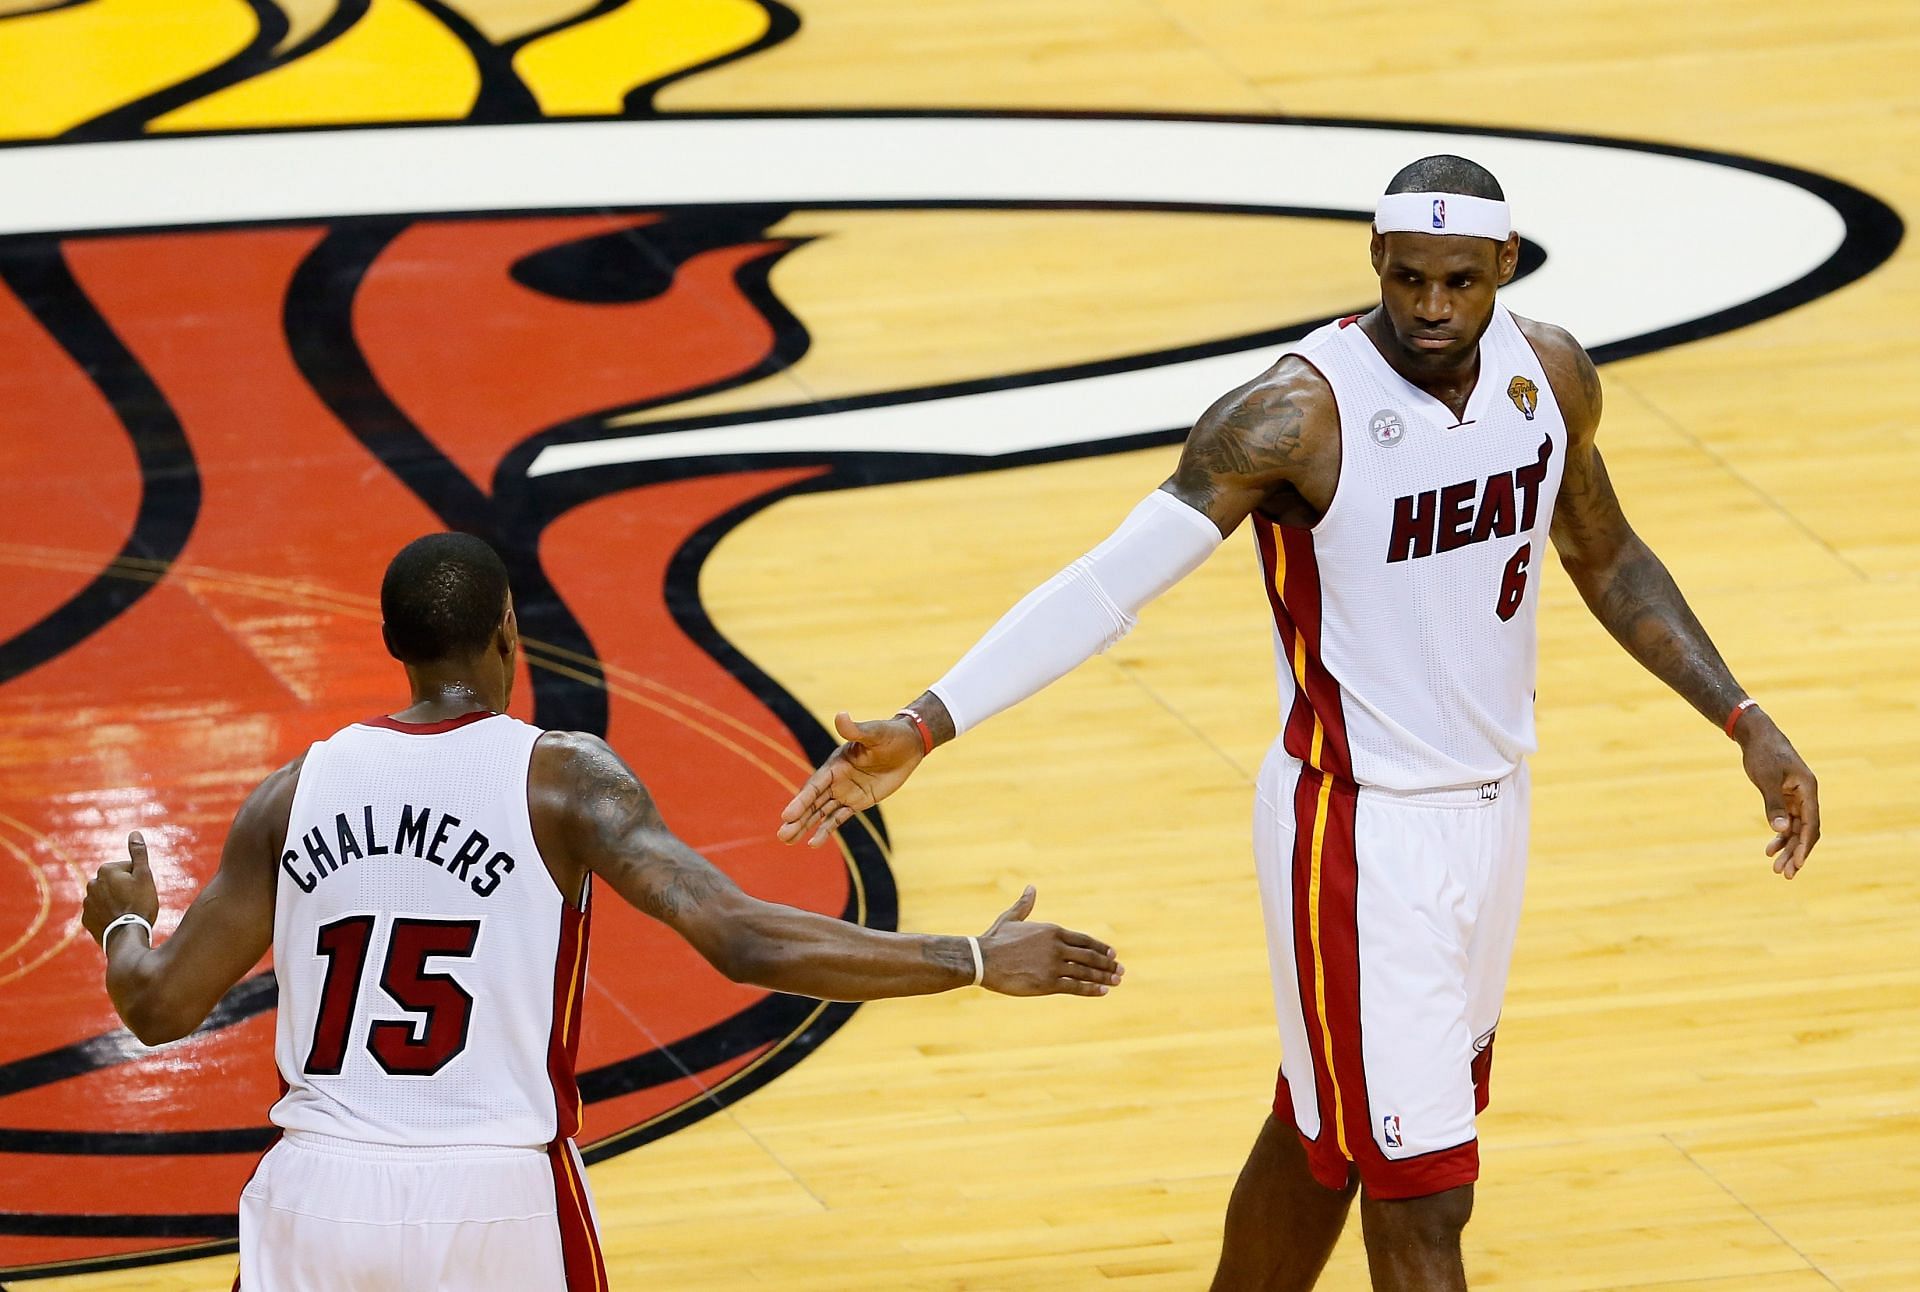 Mario Chalmers and LeBron James